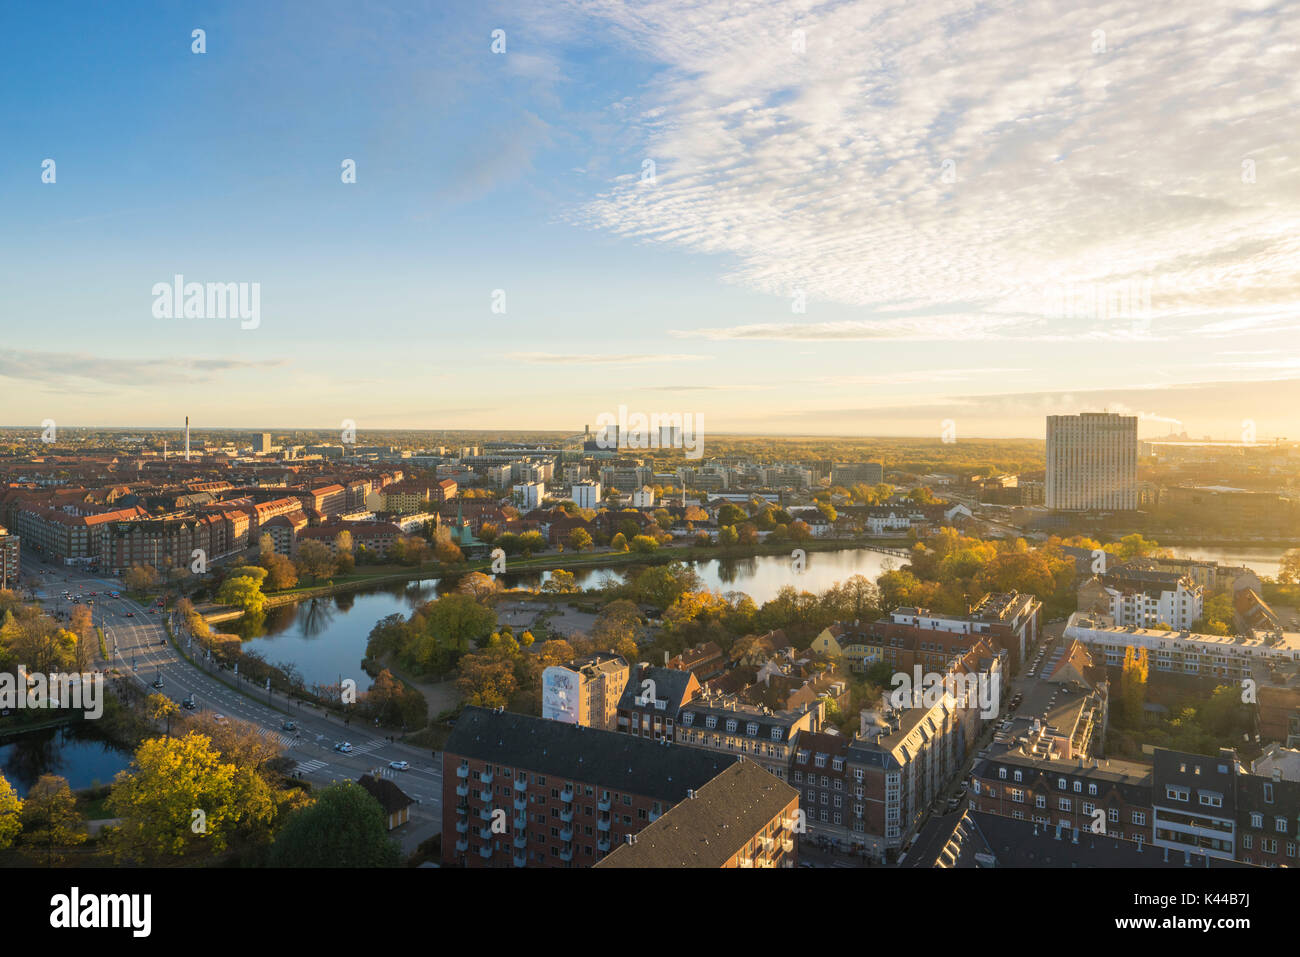 Copenhagen, Hovedstaden, Denmark, Northern Europe. Panorama of Copenhagen at the top of the Church of Our Savior in Christianshavn, one of the most famous churches in Denmark. Stock Photo